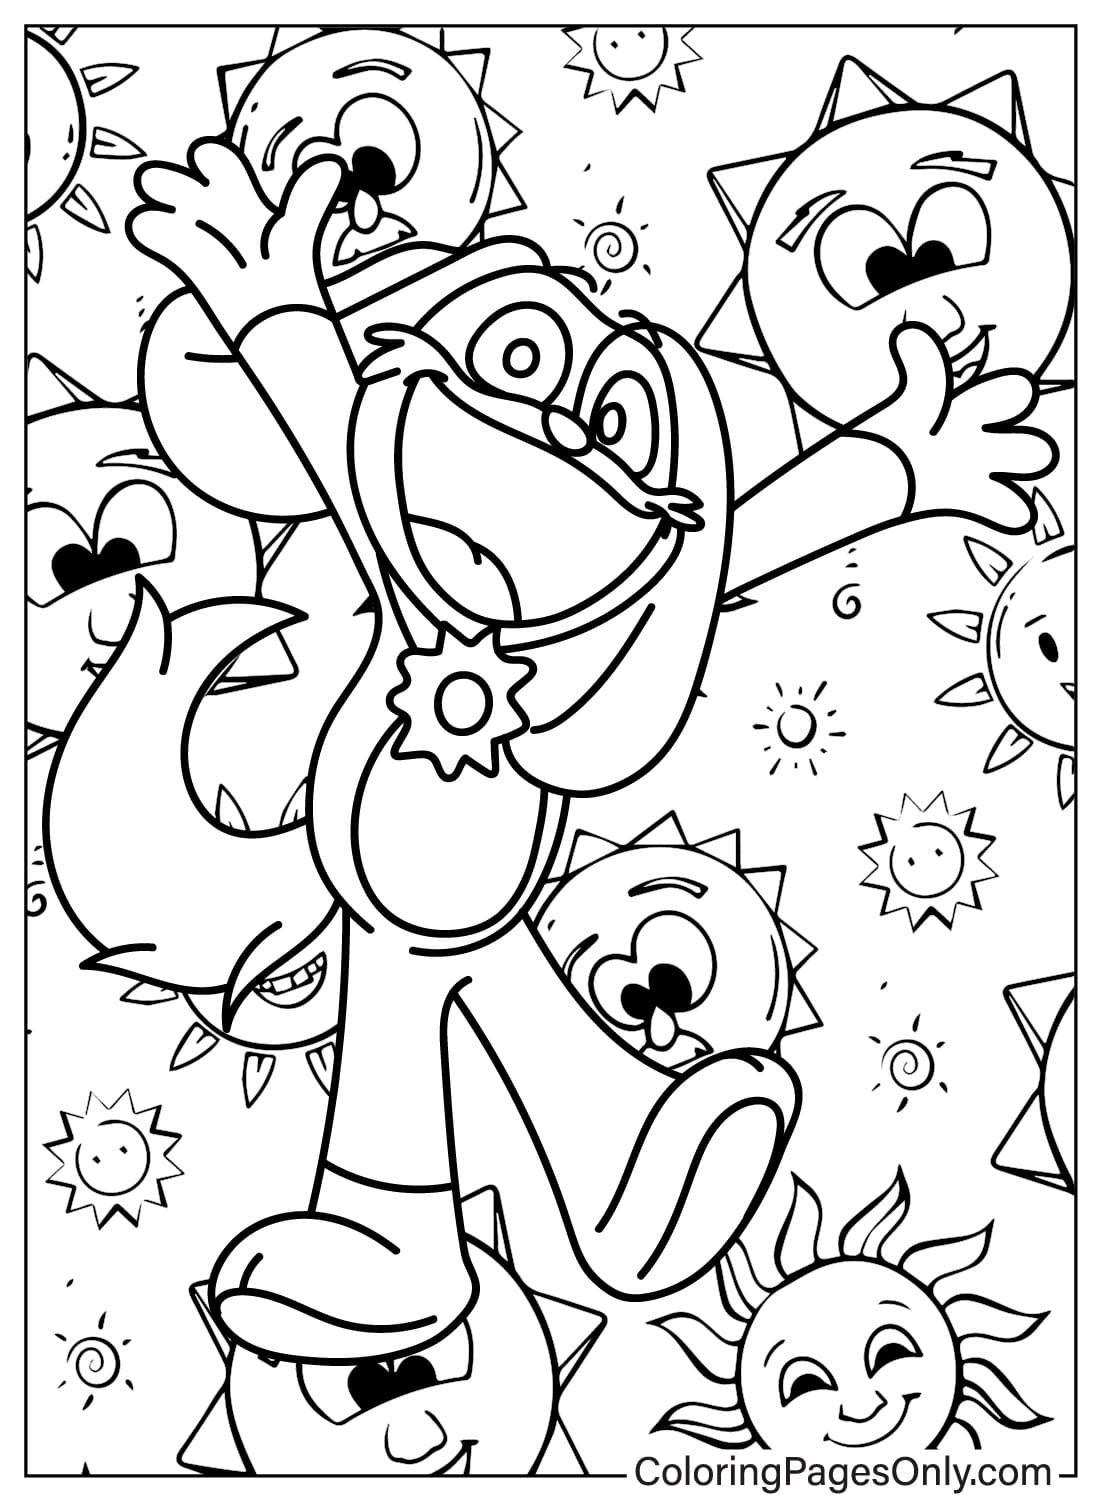 Images DogDay Coloring Page Free from DogDay